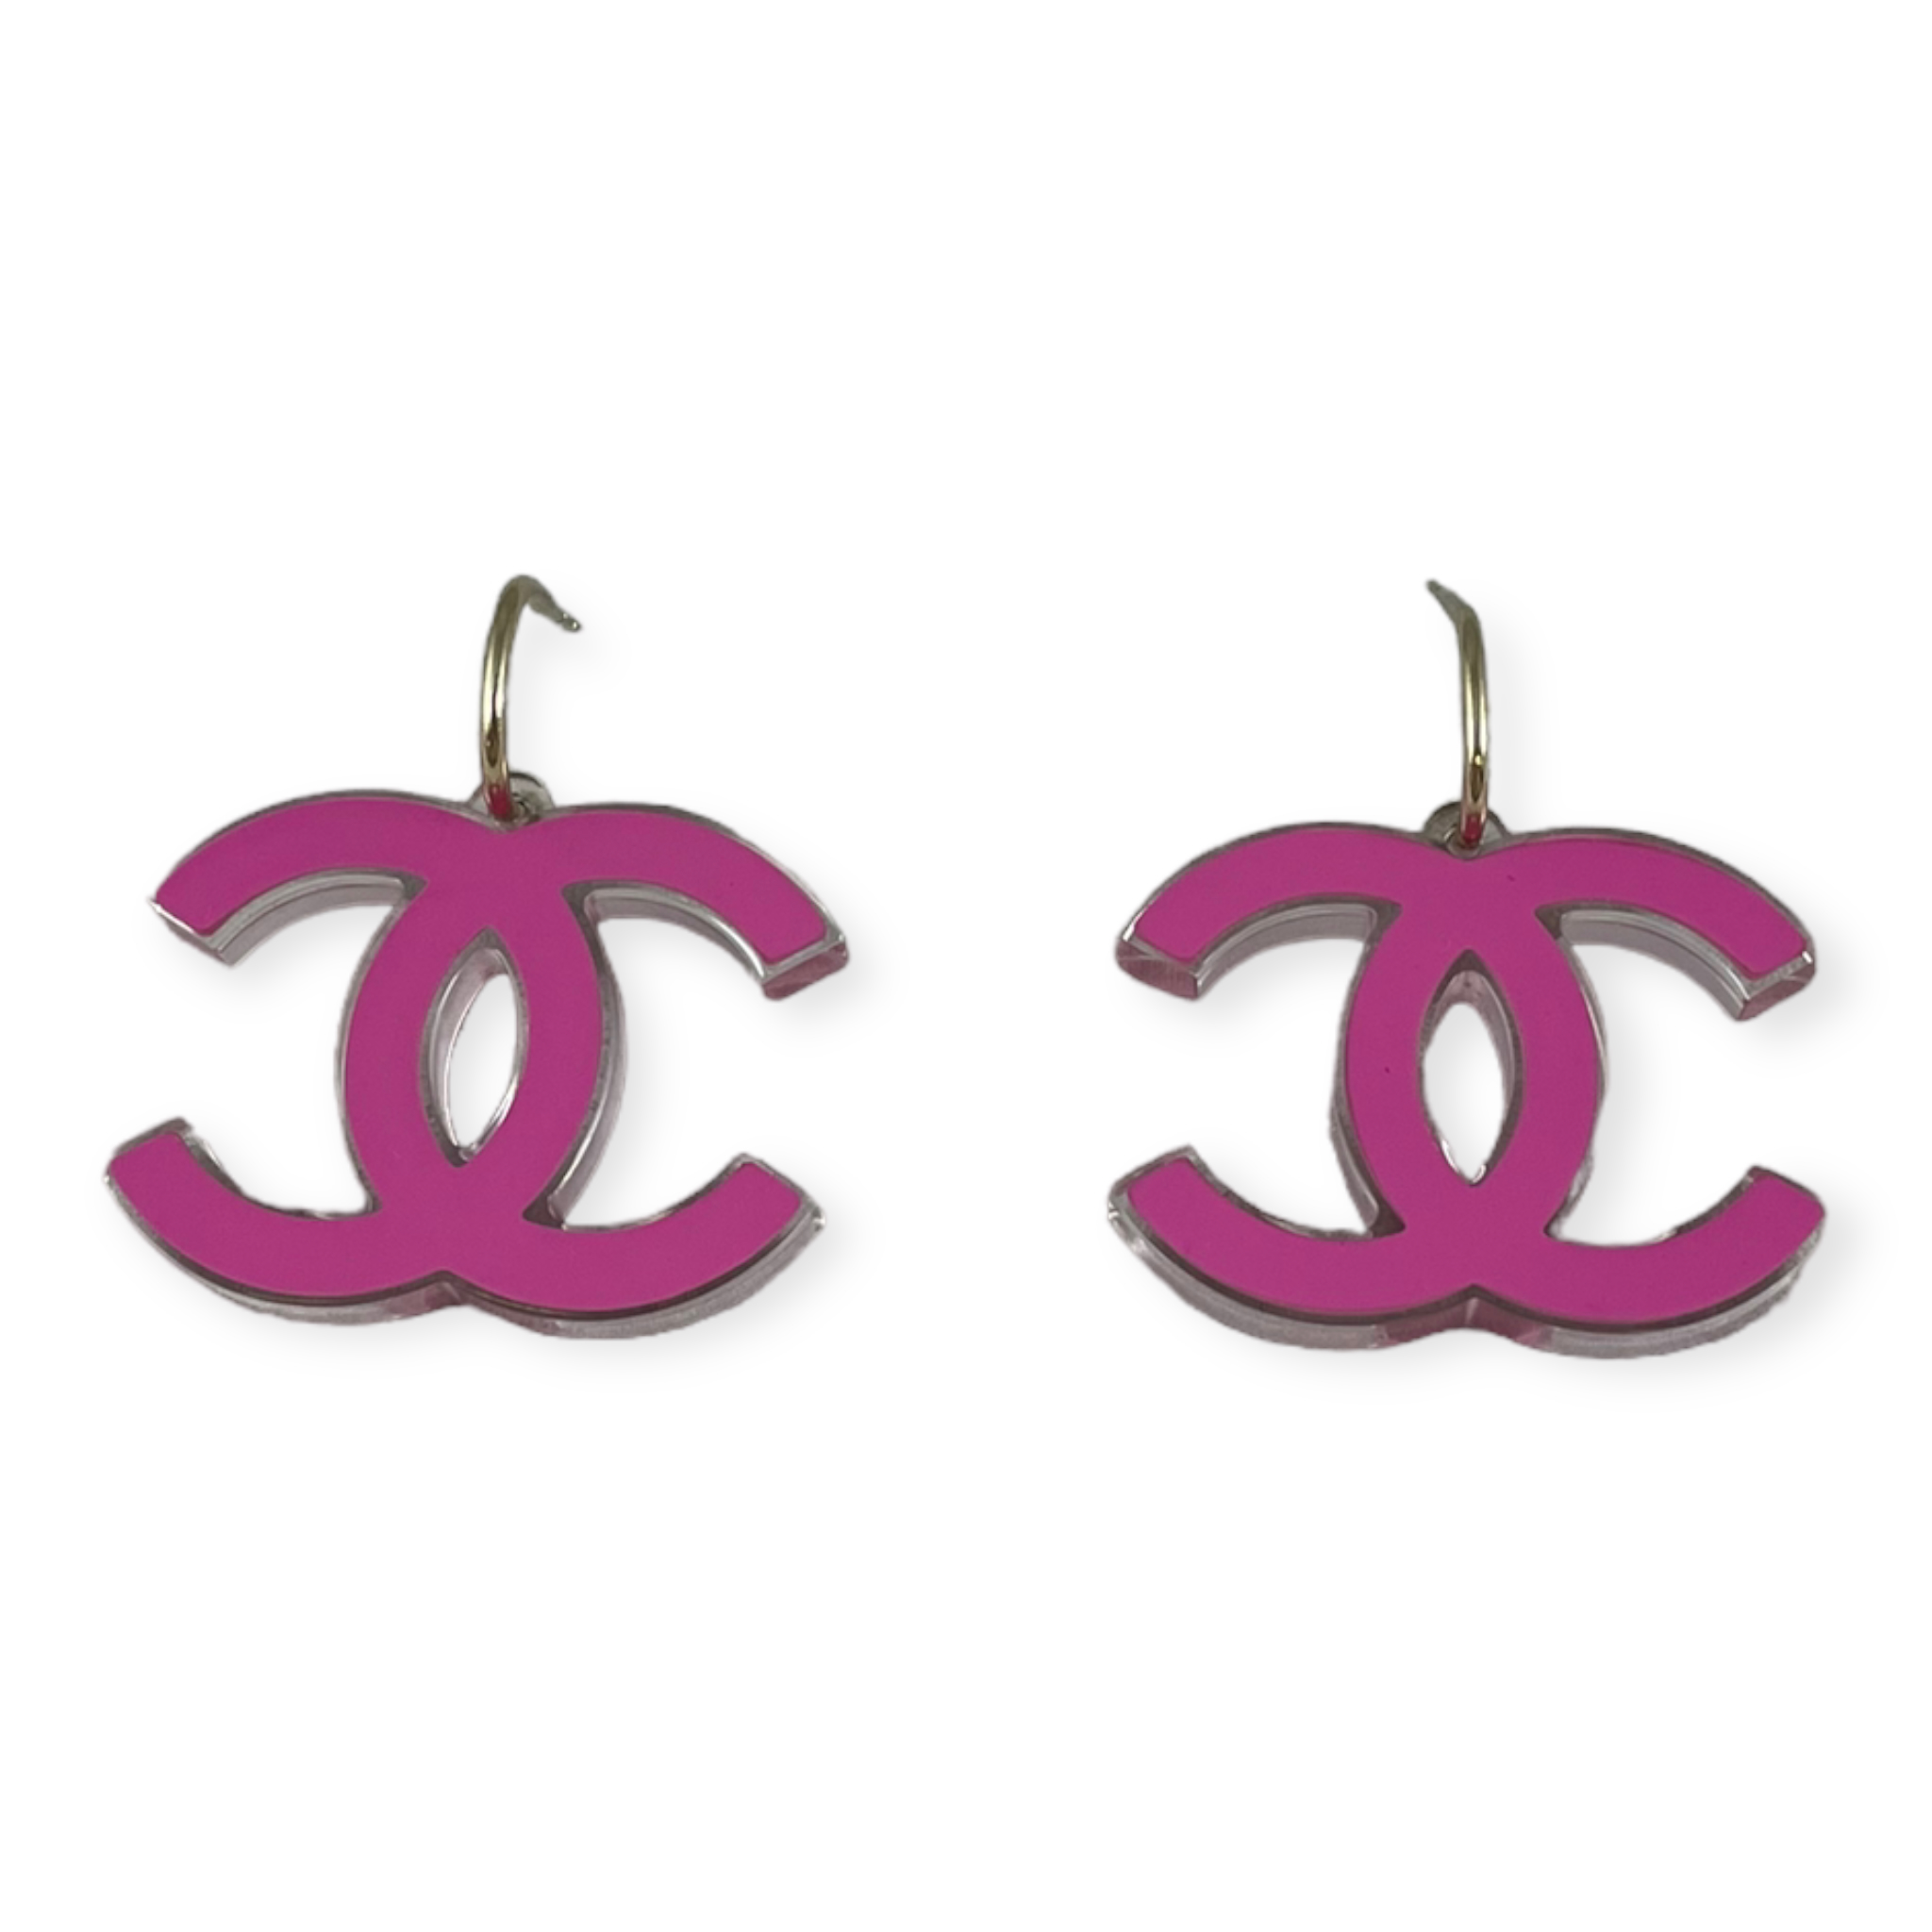 Chanel Vintage Lucite Reversible (light pink to bright pink) CC Earrings  $399